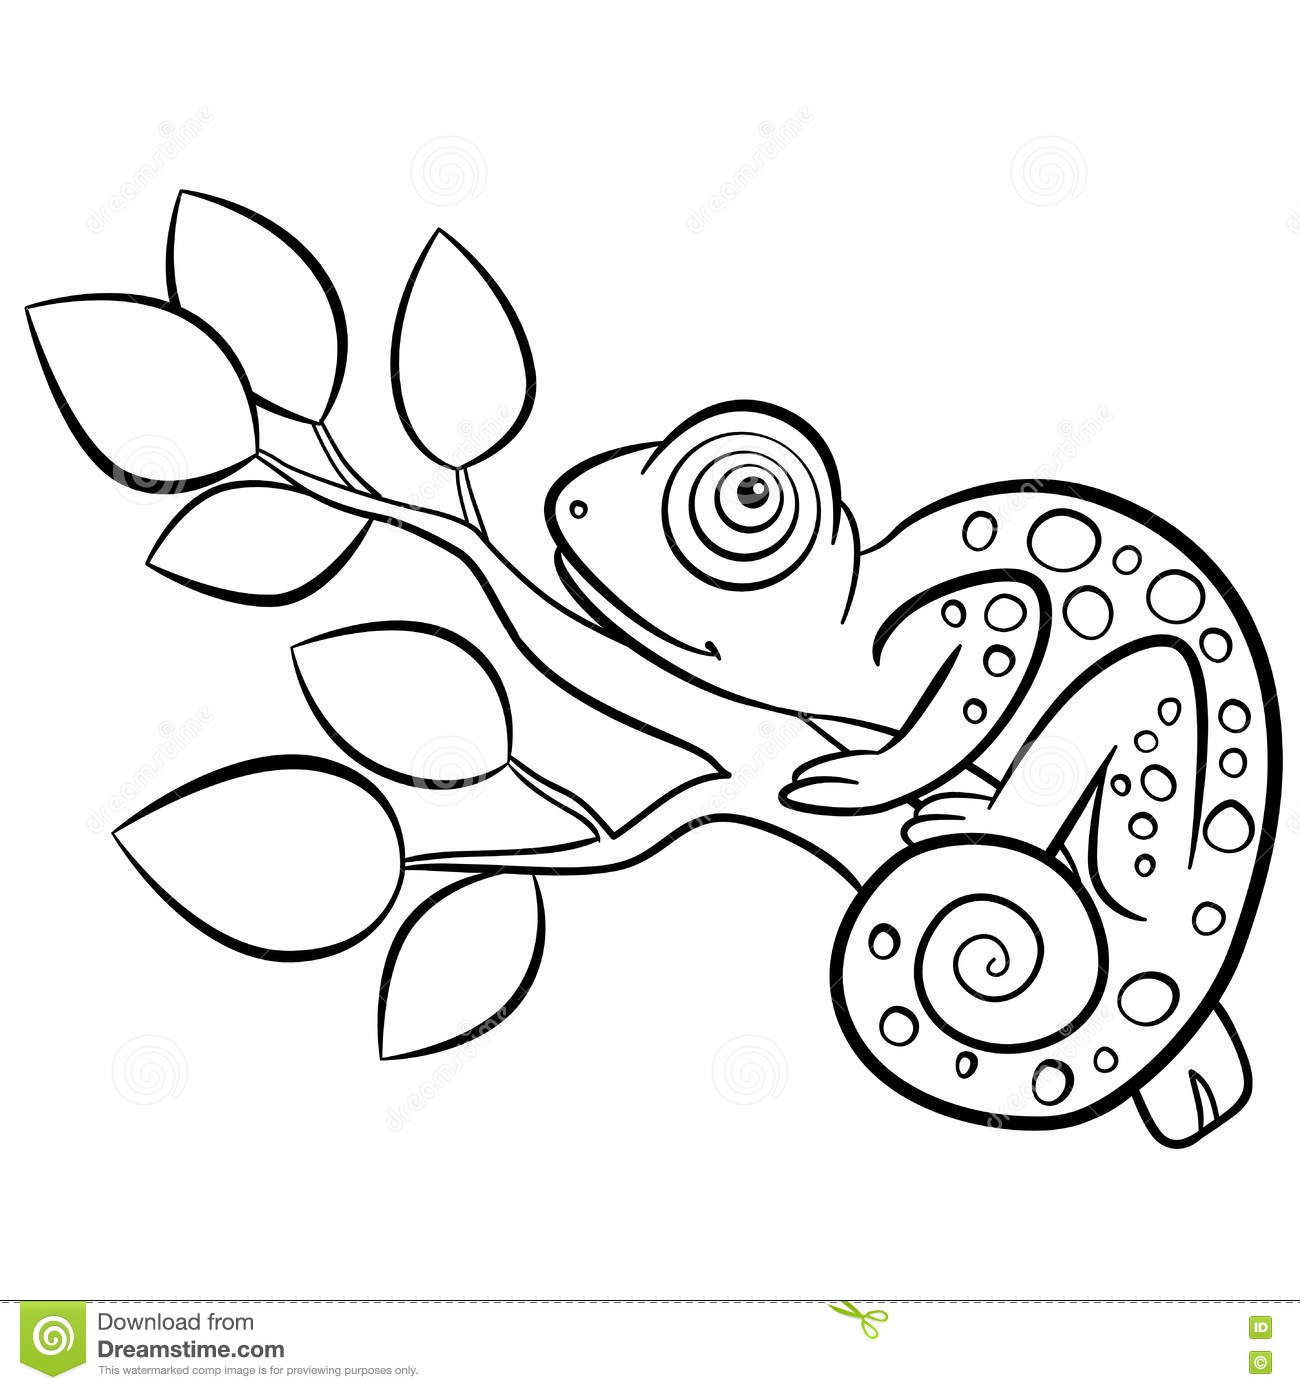 chameleon-coloring-pages-printable-at-getdrawings-free-download